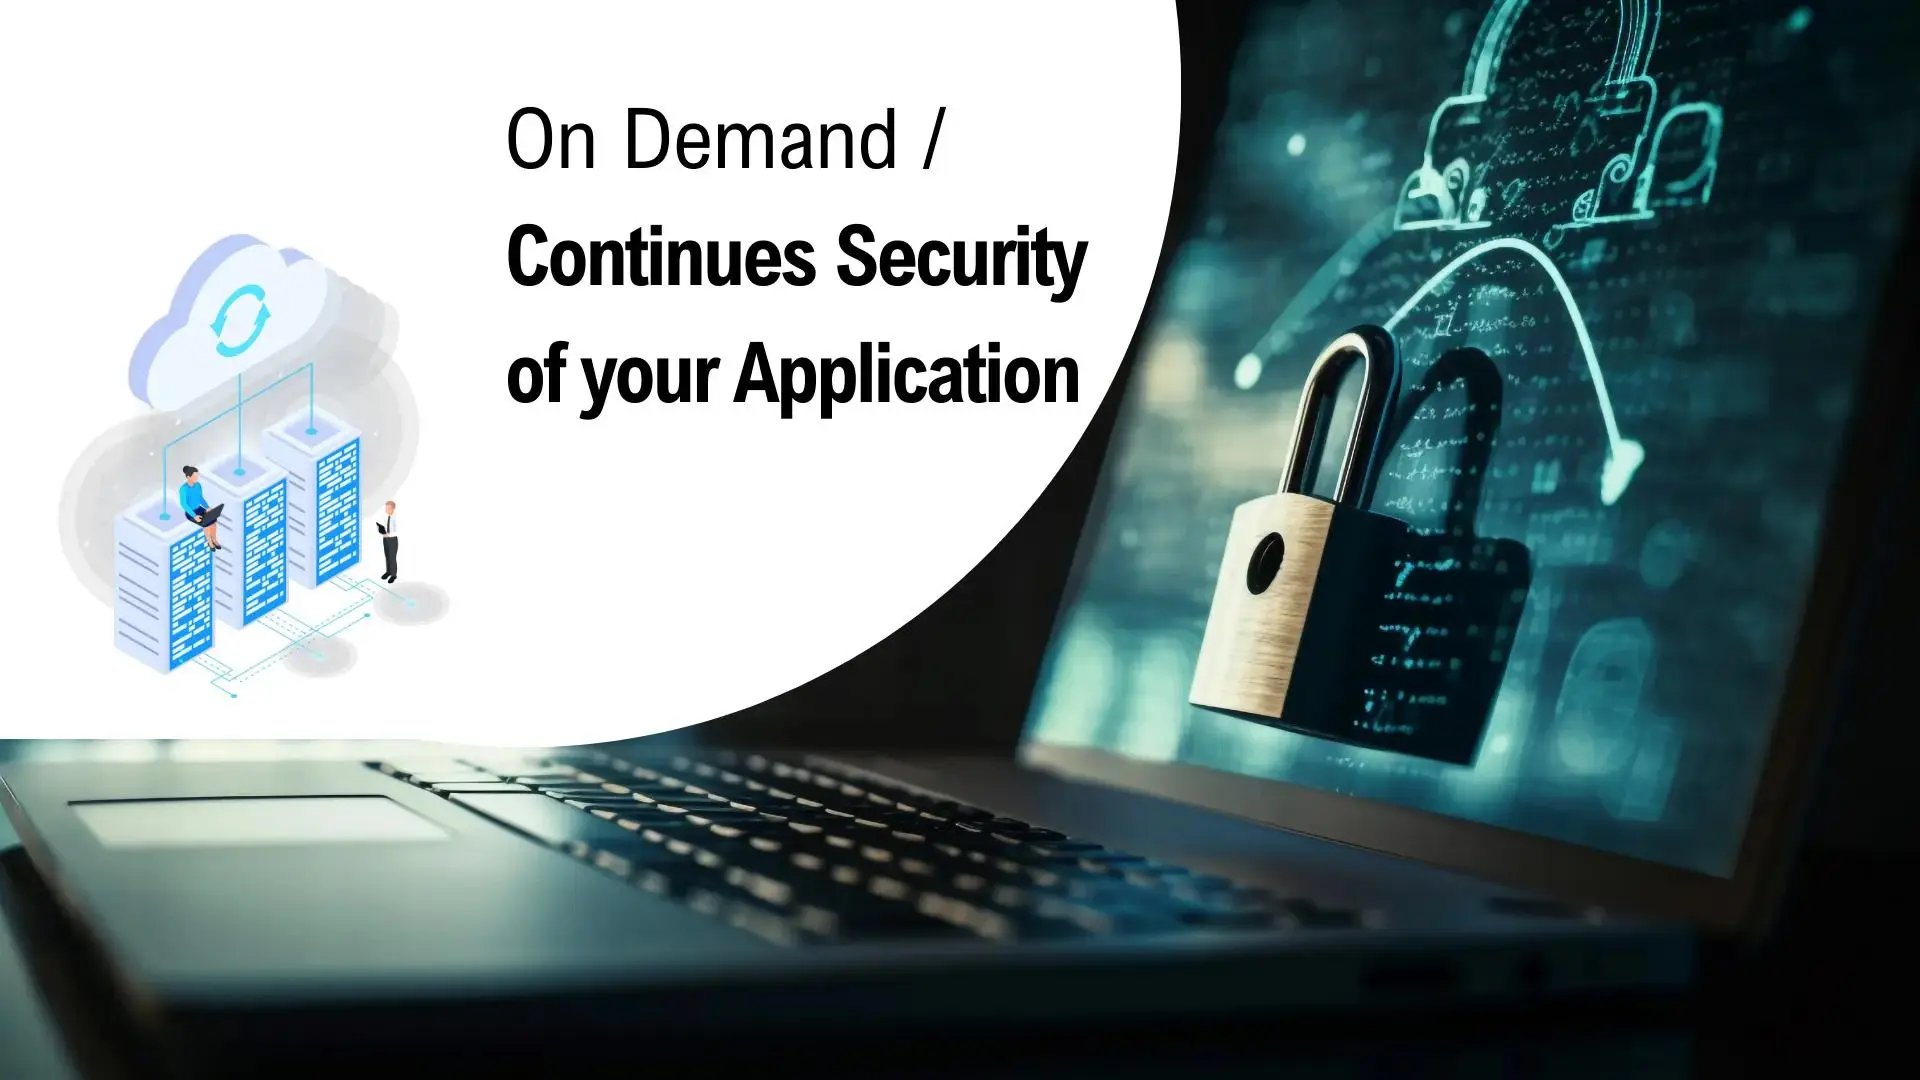 ON DEMAND APPLICATION SECURITY